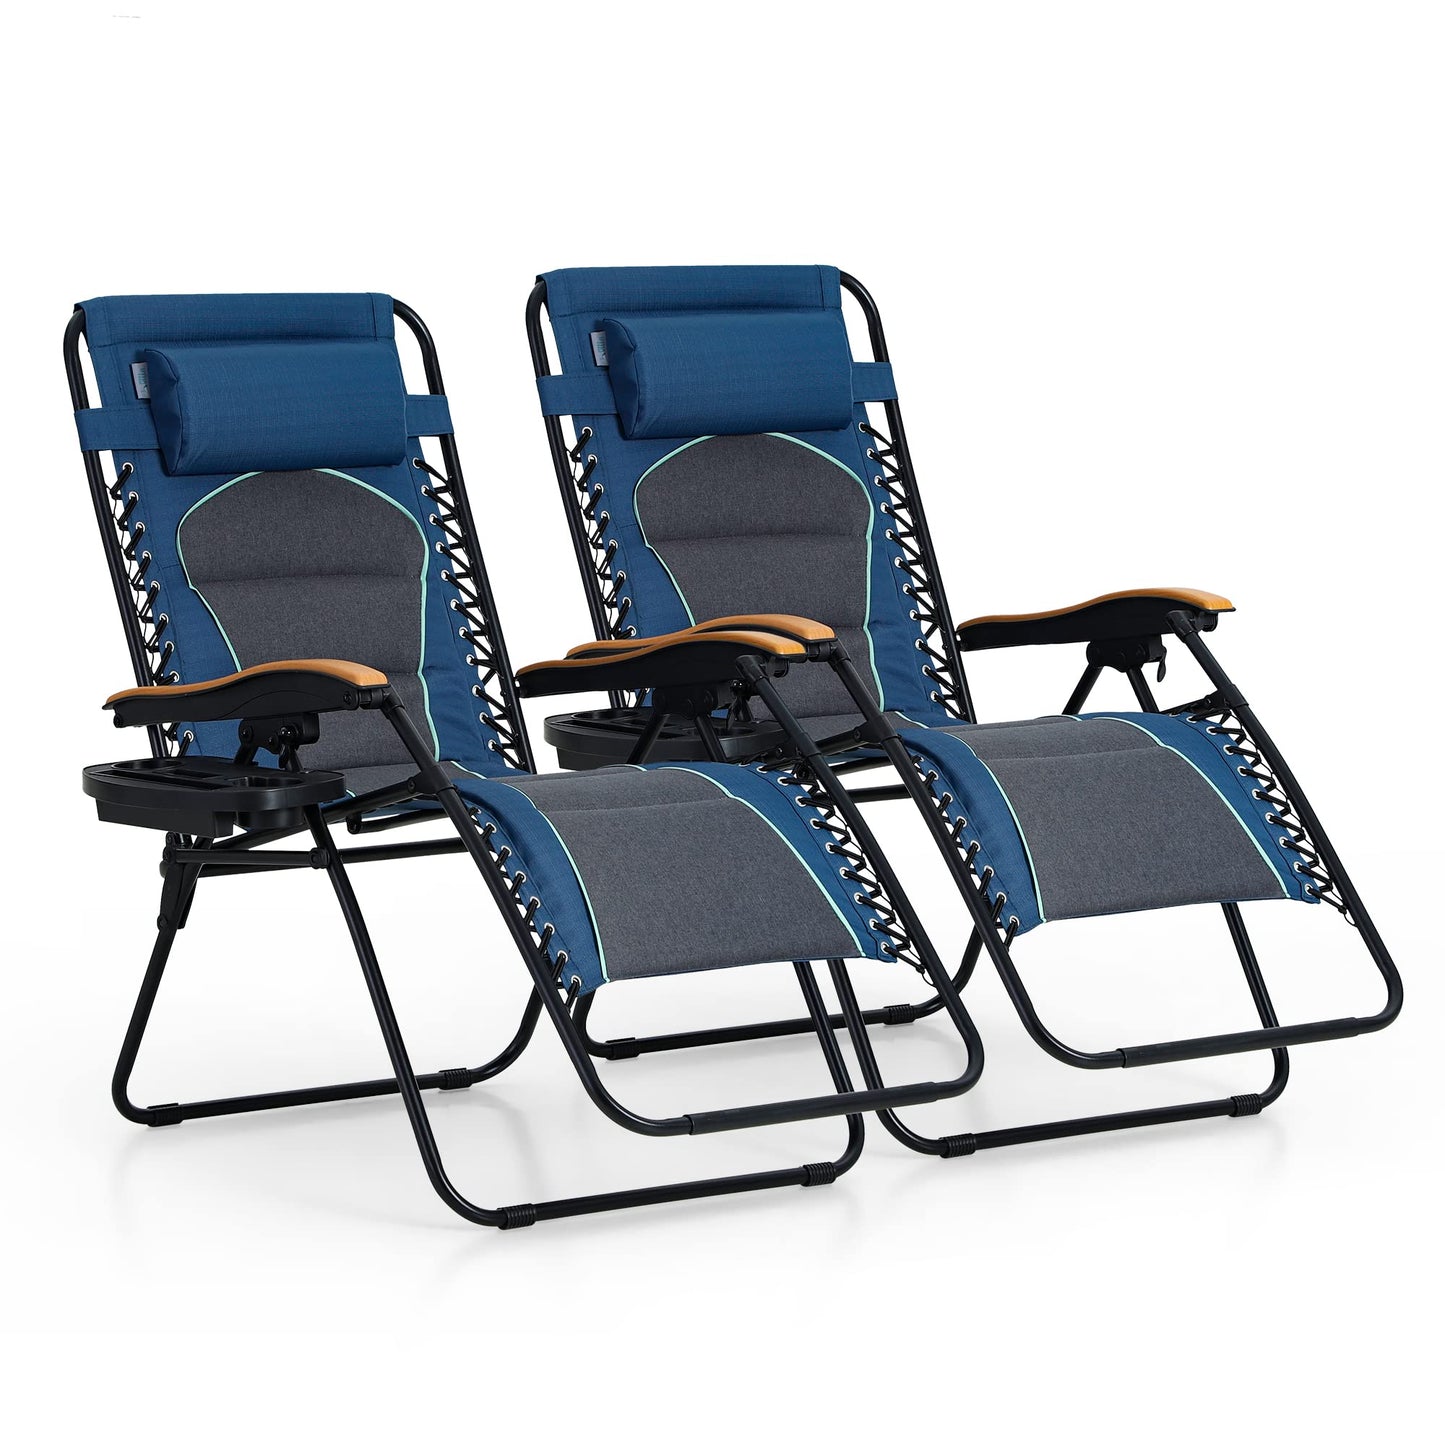 PHI VILLA Oversize XL Padded Zero Gravity Lounge Chair Family Lovers Pack with Wide Armrest Foldable Recliner, Set of 2, Support 400 LBS (Cyan) Blue Grey-oversized 2-Pack